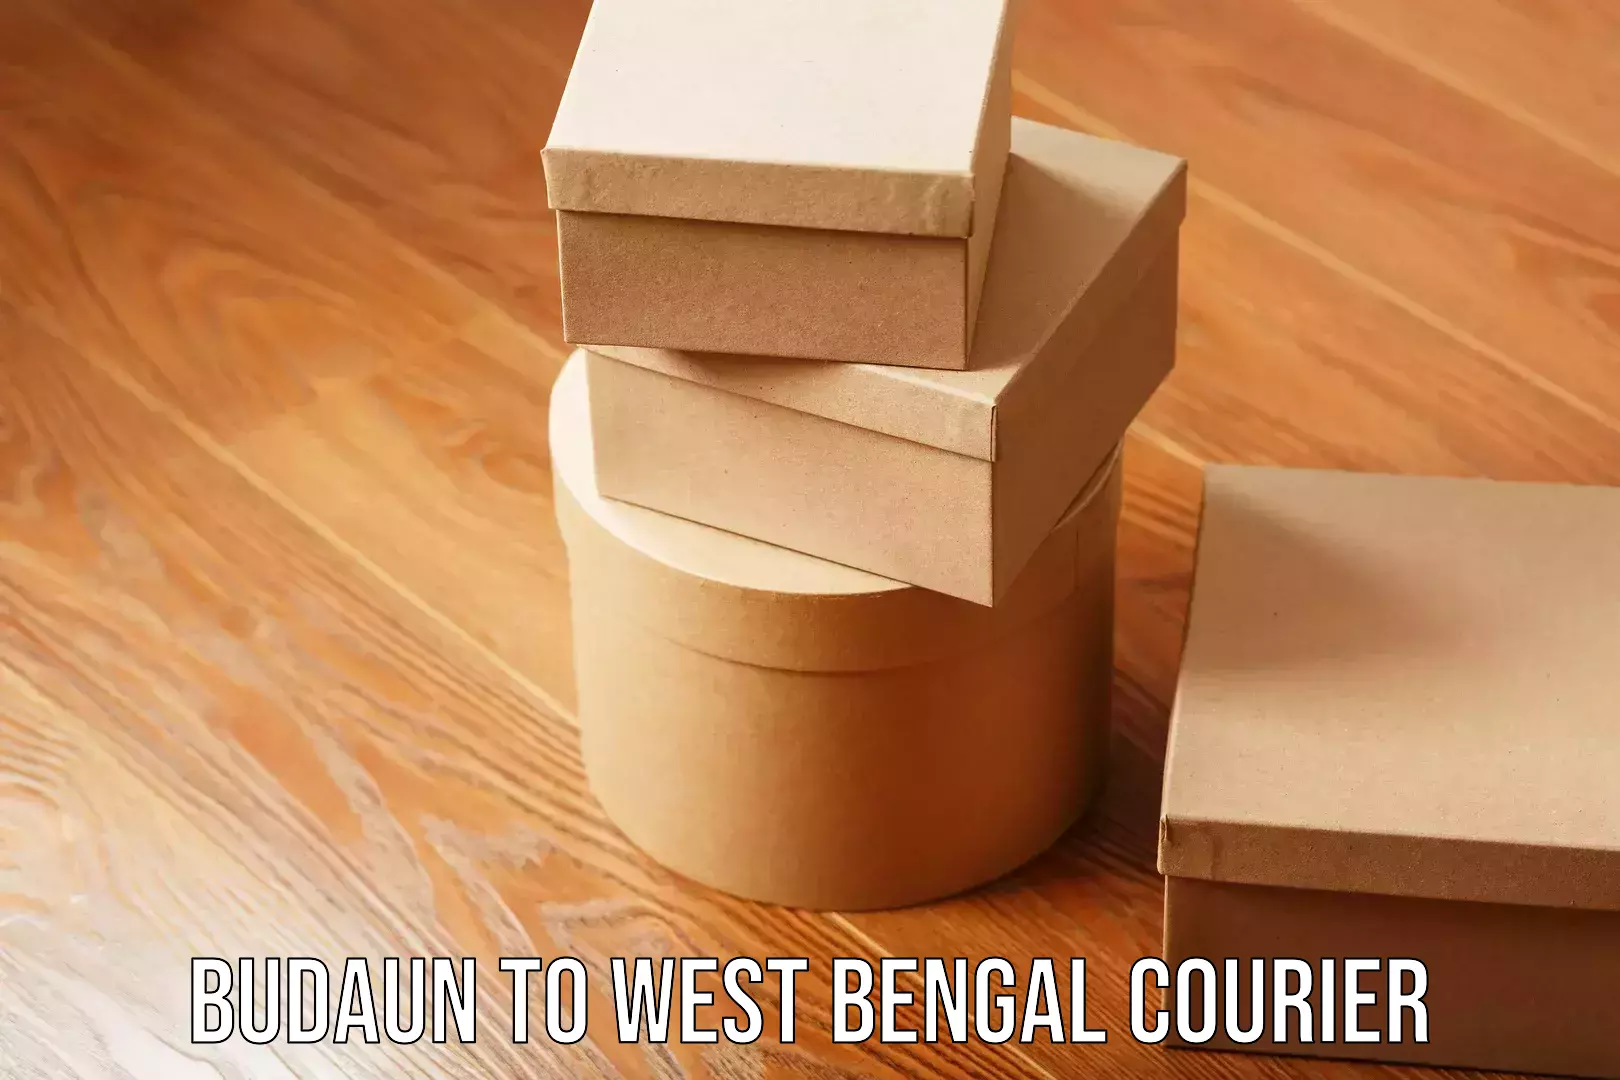 Cost-effective courier solutions Budaun to West Bengal